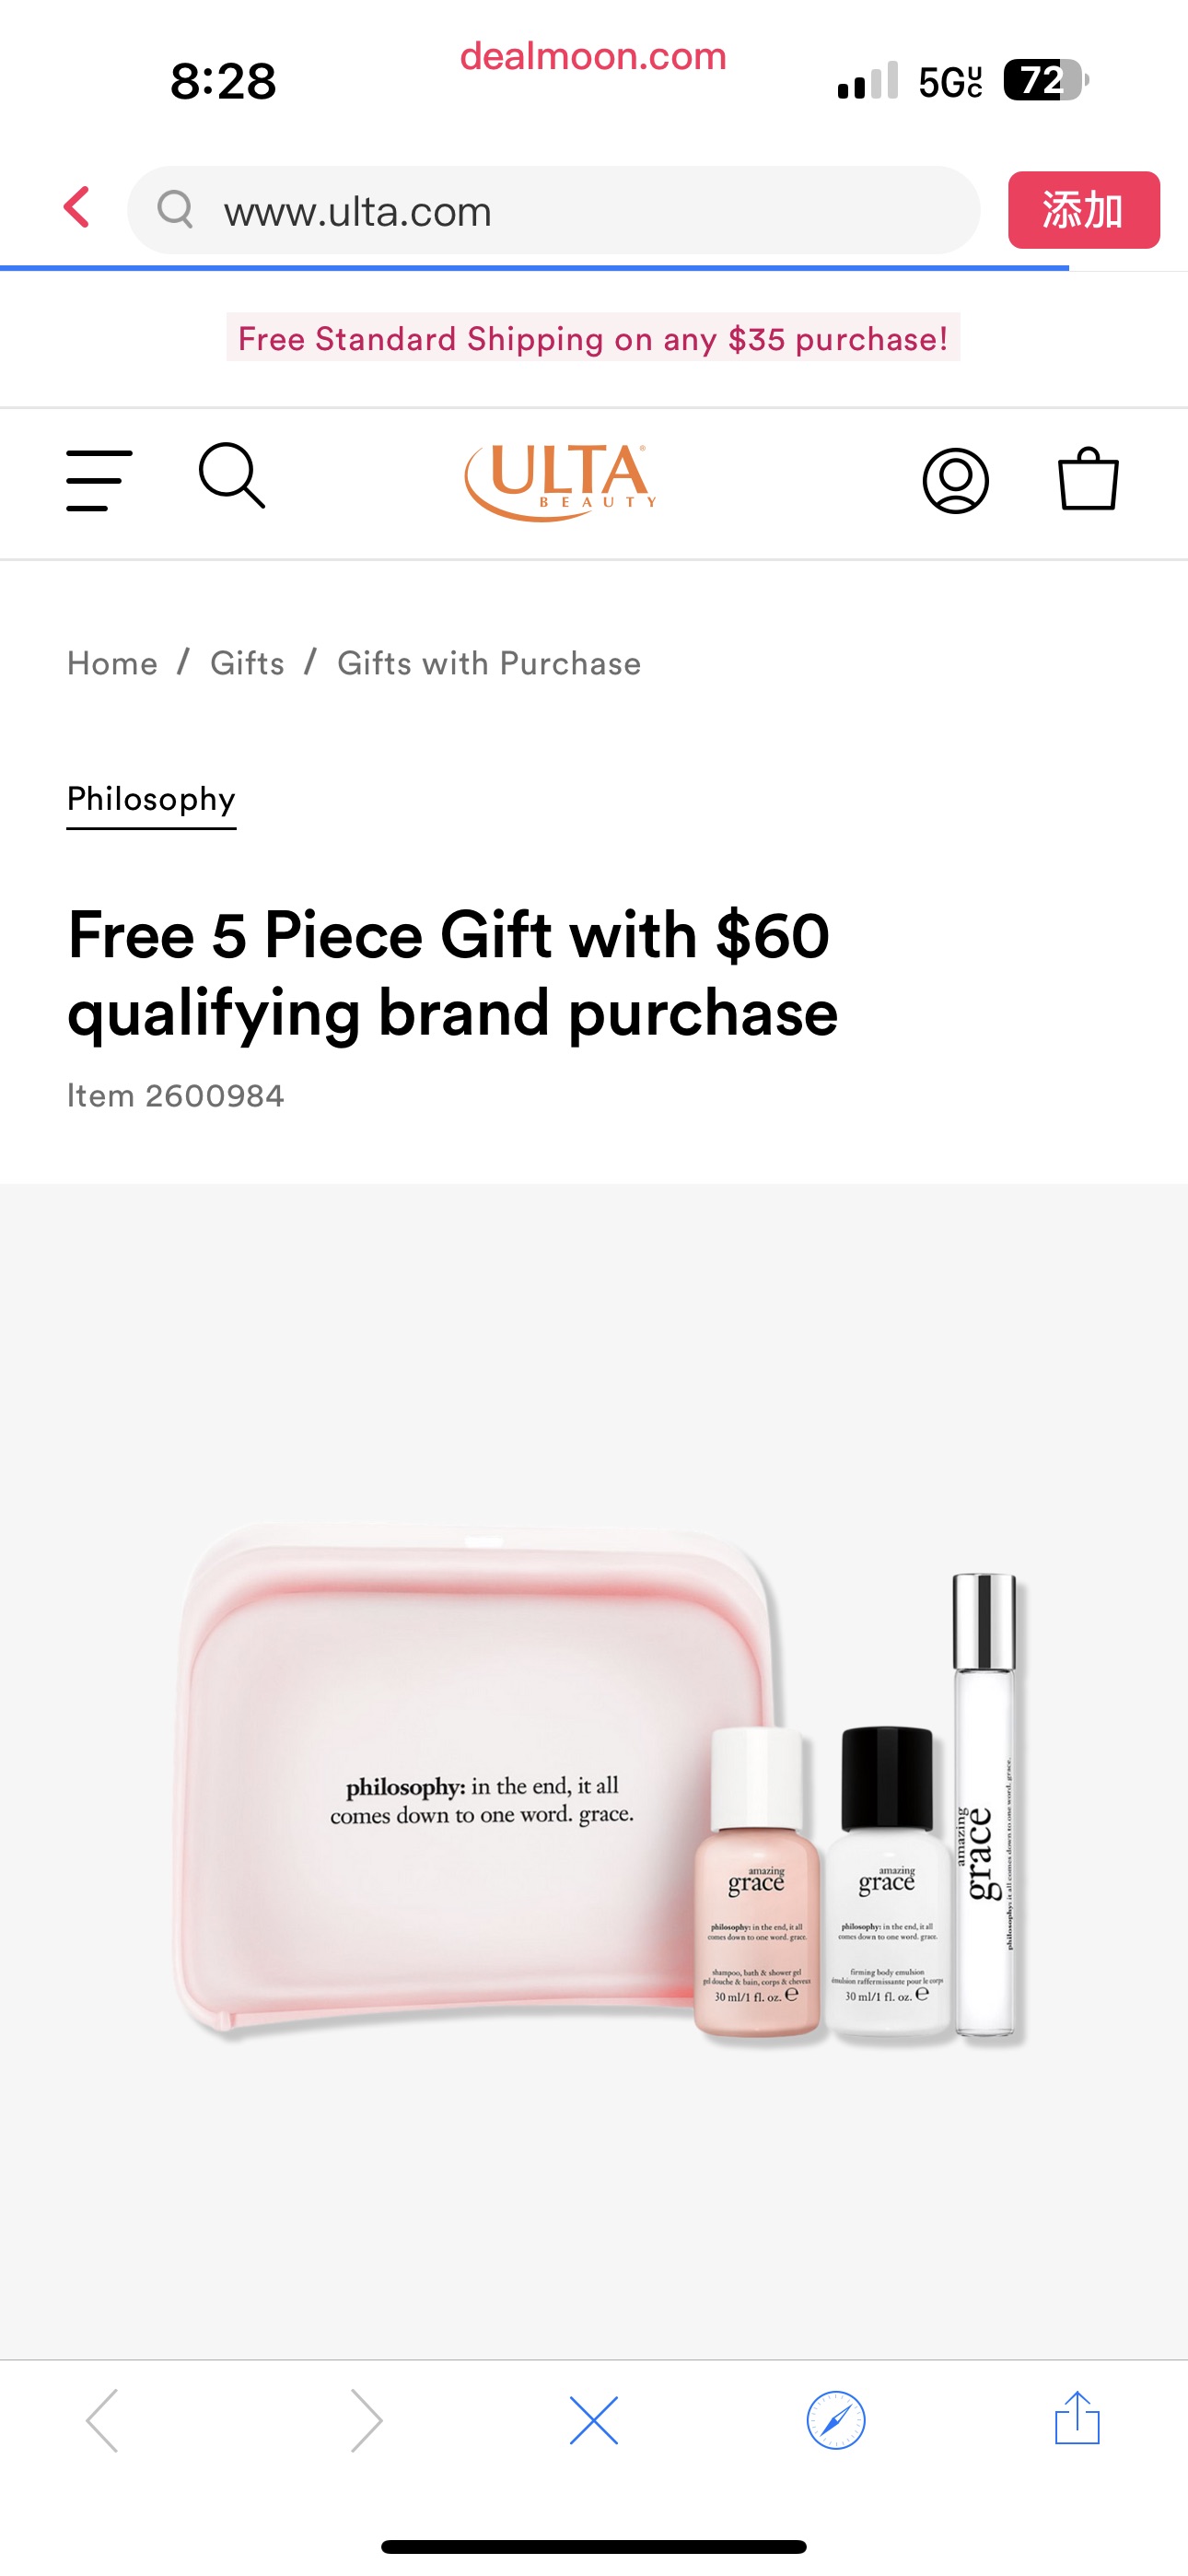 Free 5 Piece Gift with $60 qualifying brand purchase - Philosophy | Ulta Beauty满60送五件套